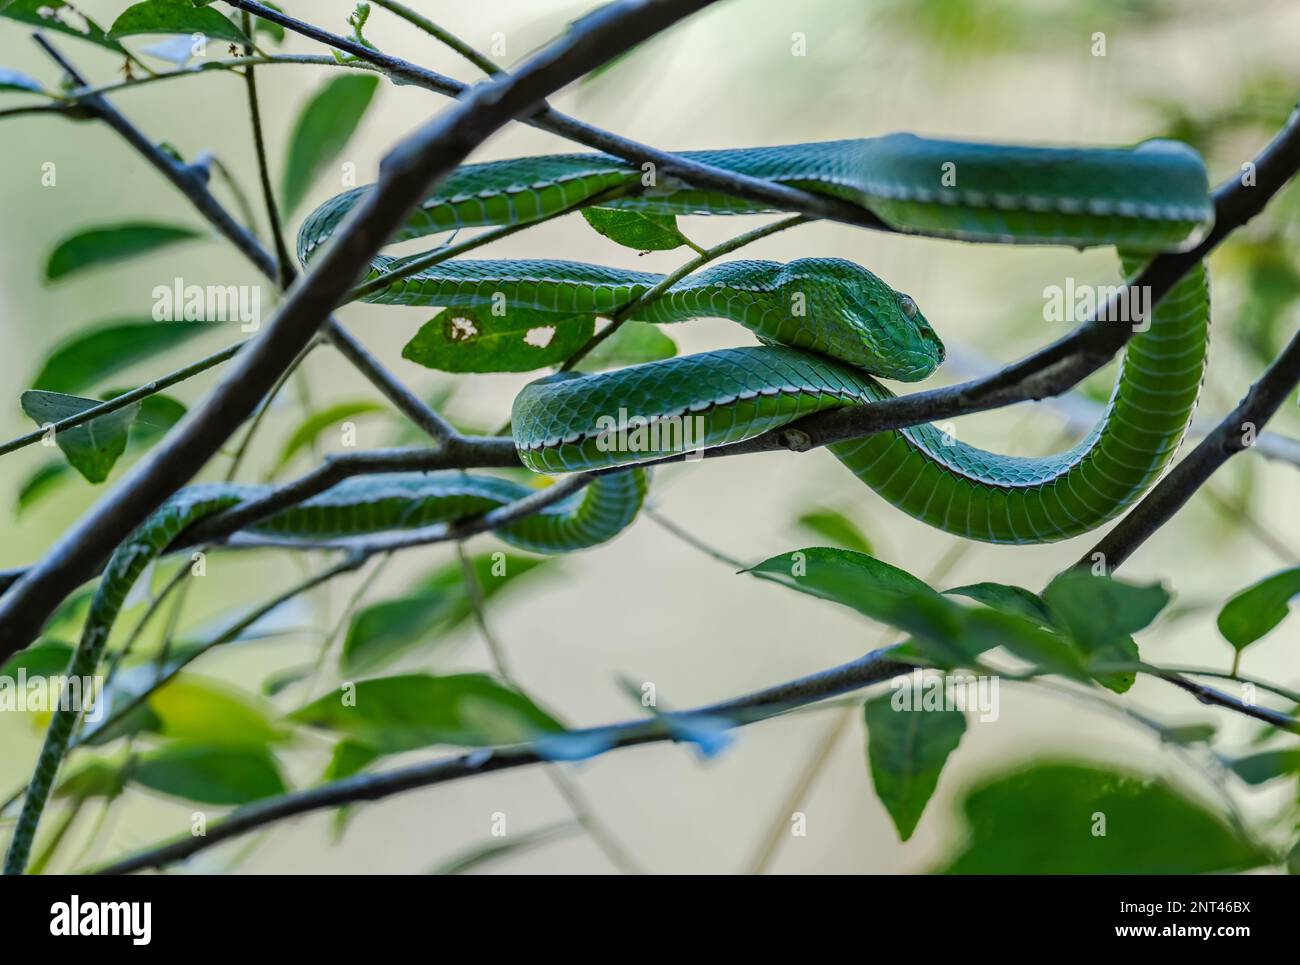 A green venomous Pit Viper snake (Trimeresurus sp.) coiled up on a tree. Thailand. Stock Photo